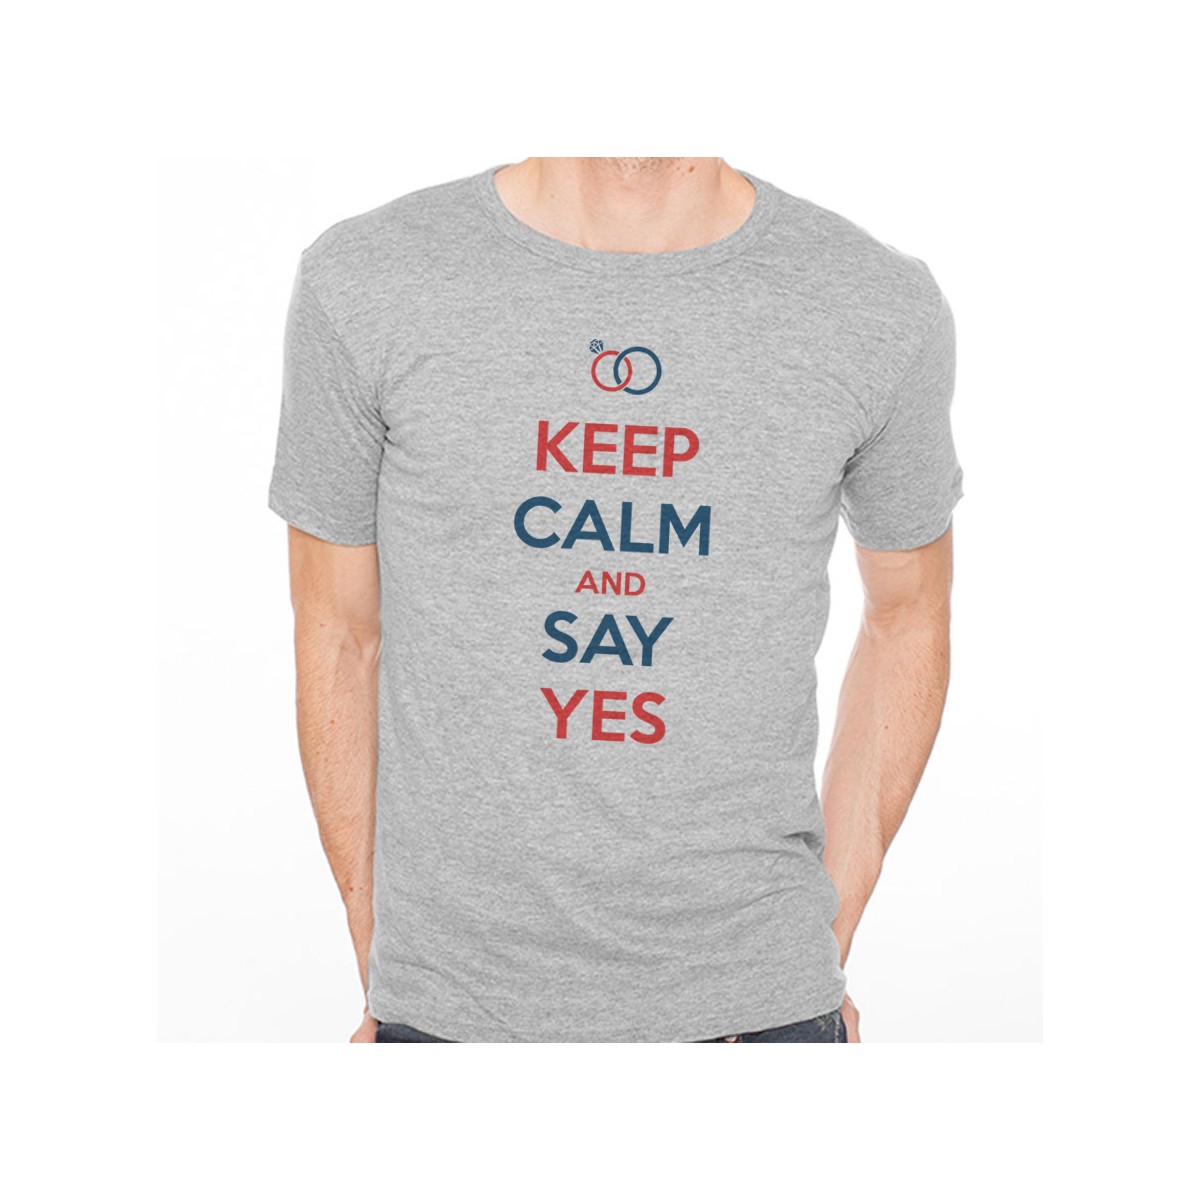 T-shirt KEEP CALM AND SAY YES